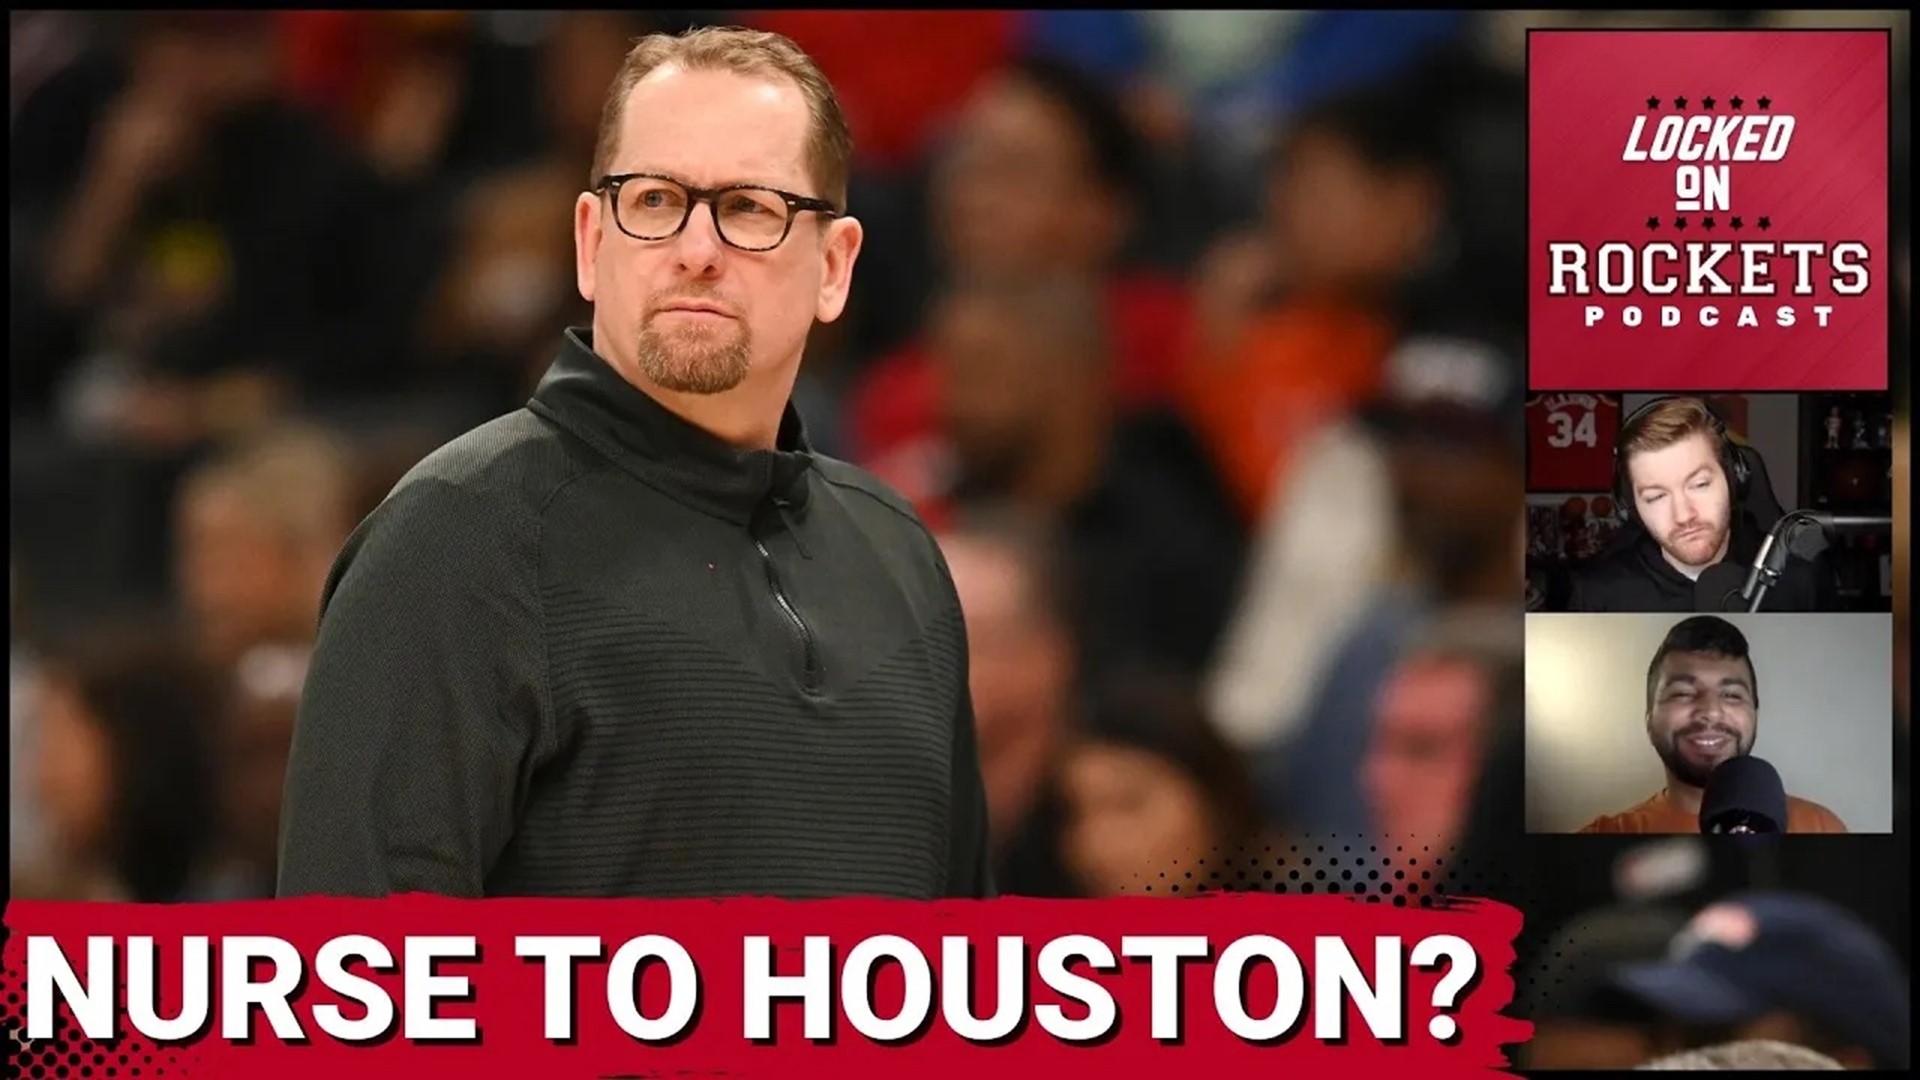 Jackson Gatlin and Alykhan Bijani discuss the Toronto Star report that Raptors head coach Nick Nurse is rumored to be connected to the Houston Rockets.